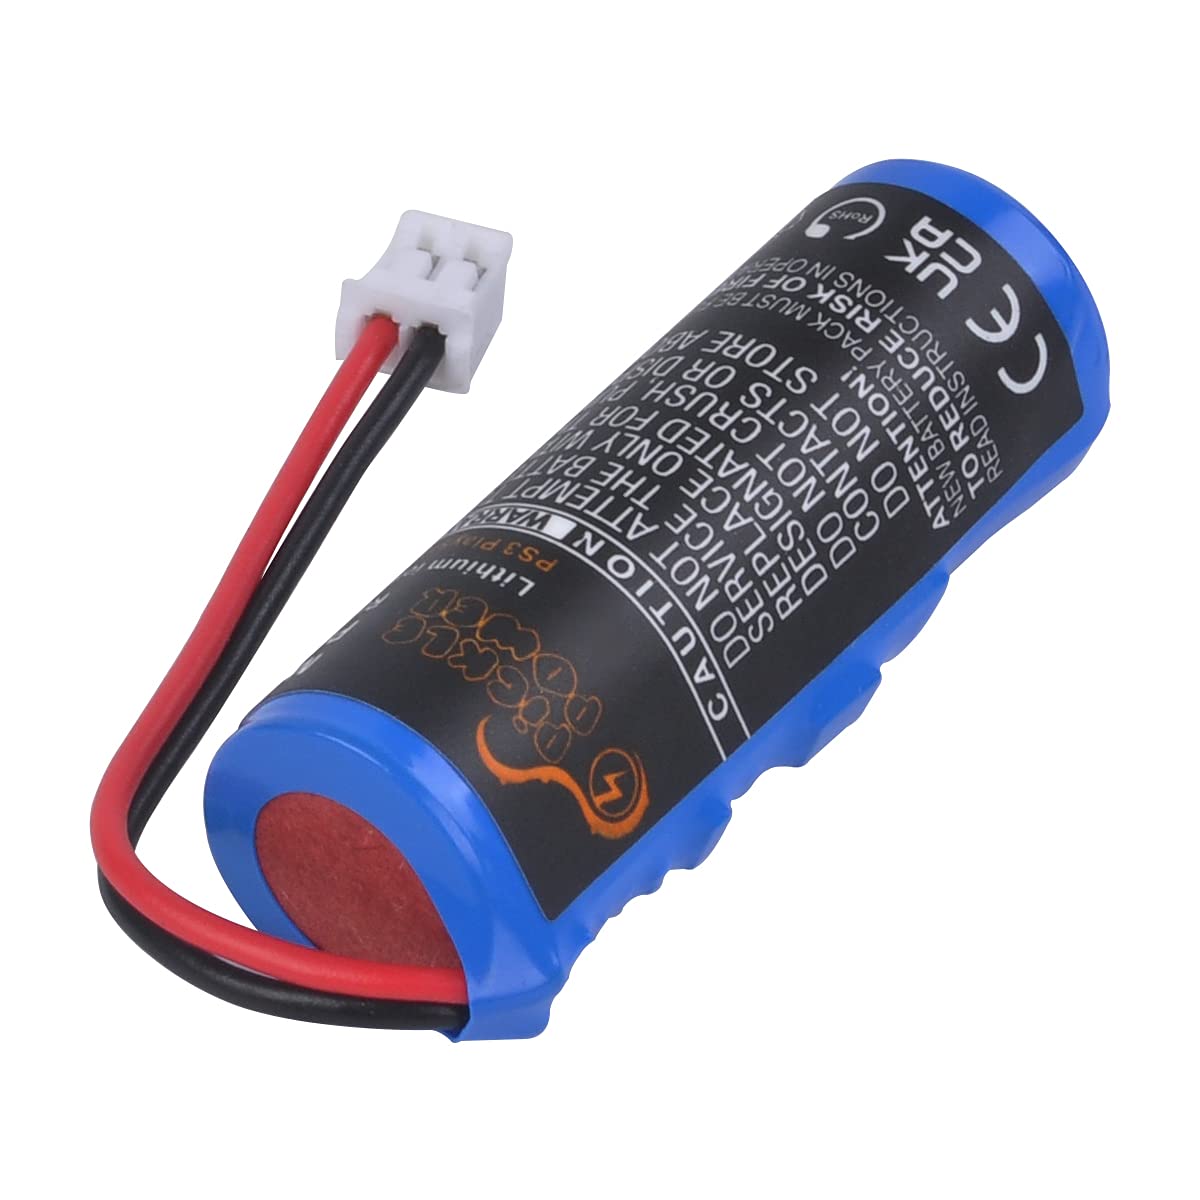 Pickle Power 2000mAh LIS1442 PS3 Move Navigation Controller Battery Replacement for Sony PS3 Playstation 3 CECH-ZCS1E CECH-ZCS1U